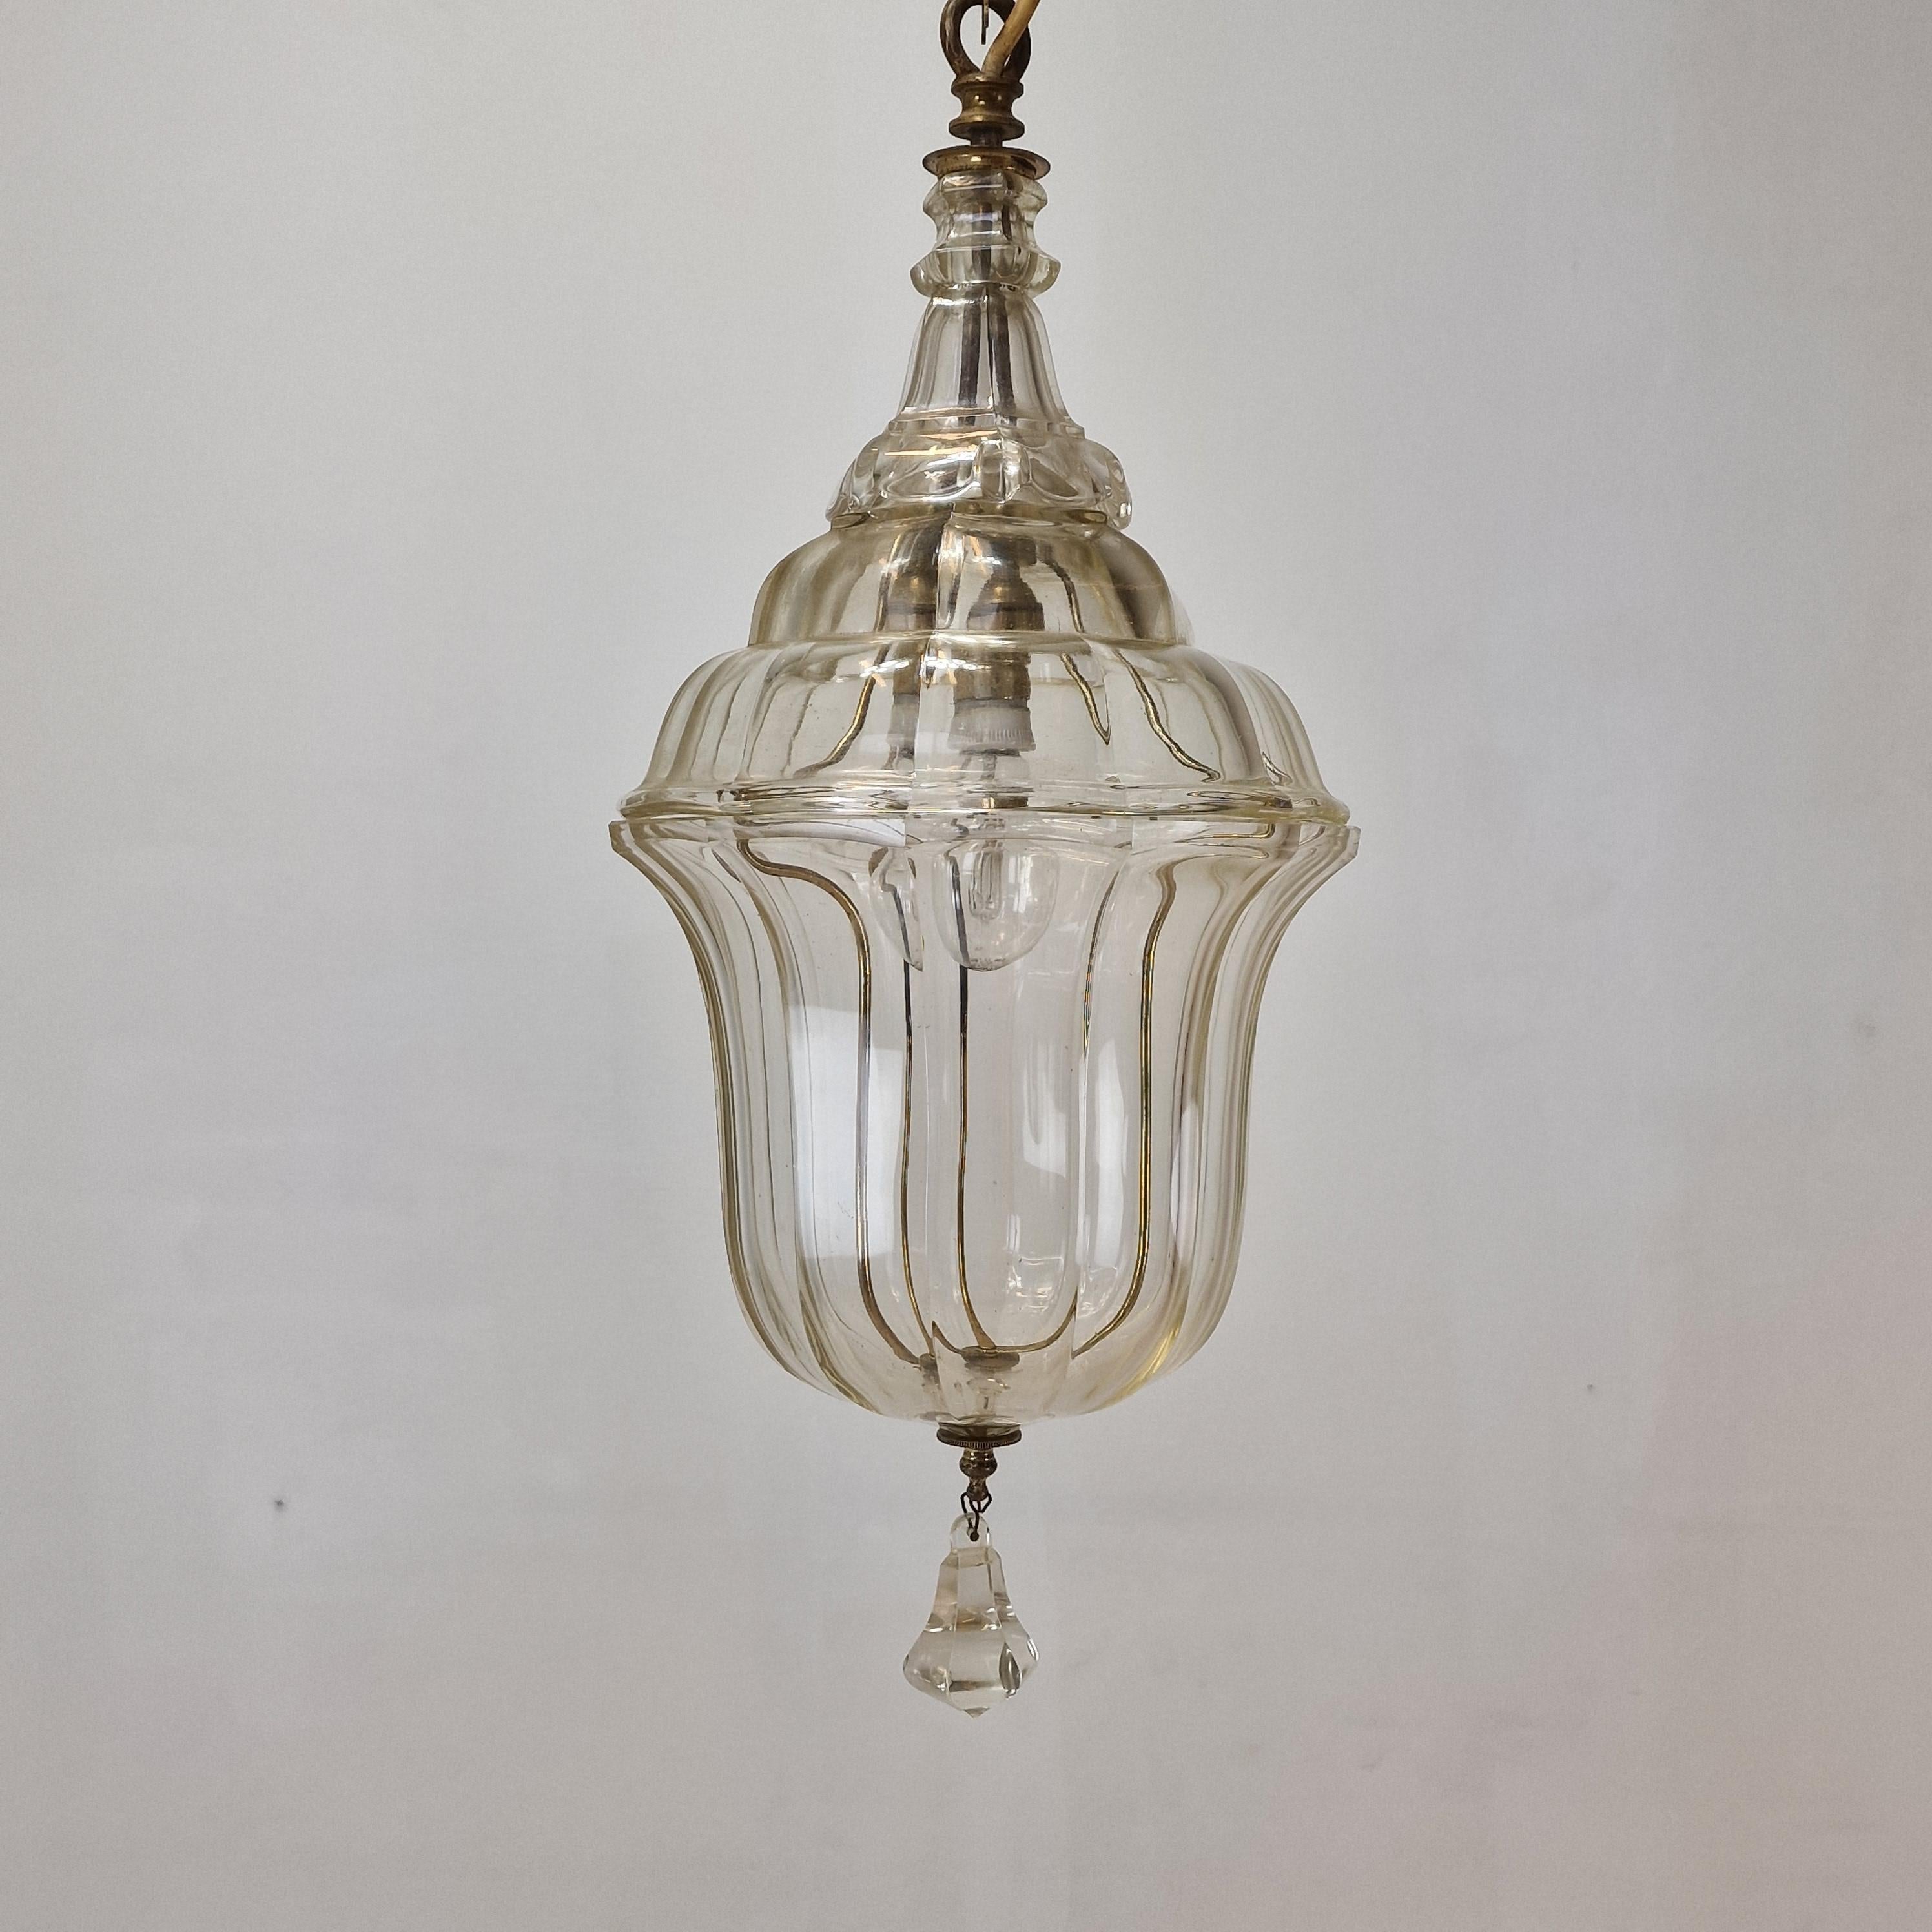 Early 20th Century Italian Cut Crystal Hanging Lantern or Lamp, 1900 For Sale